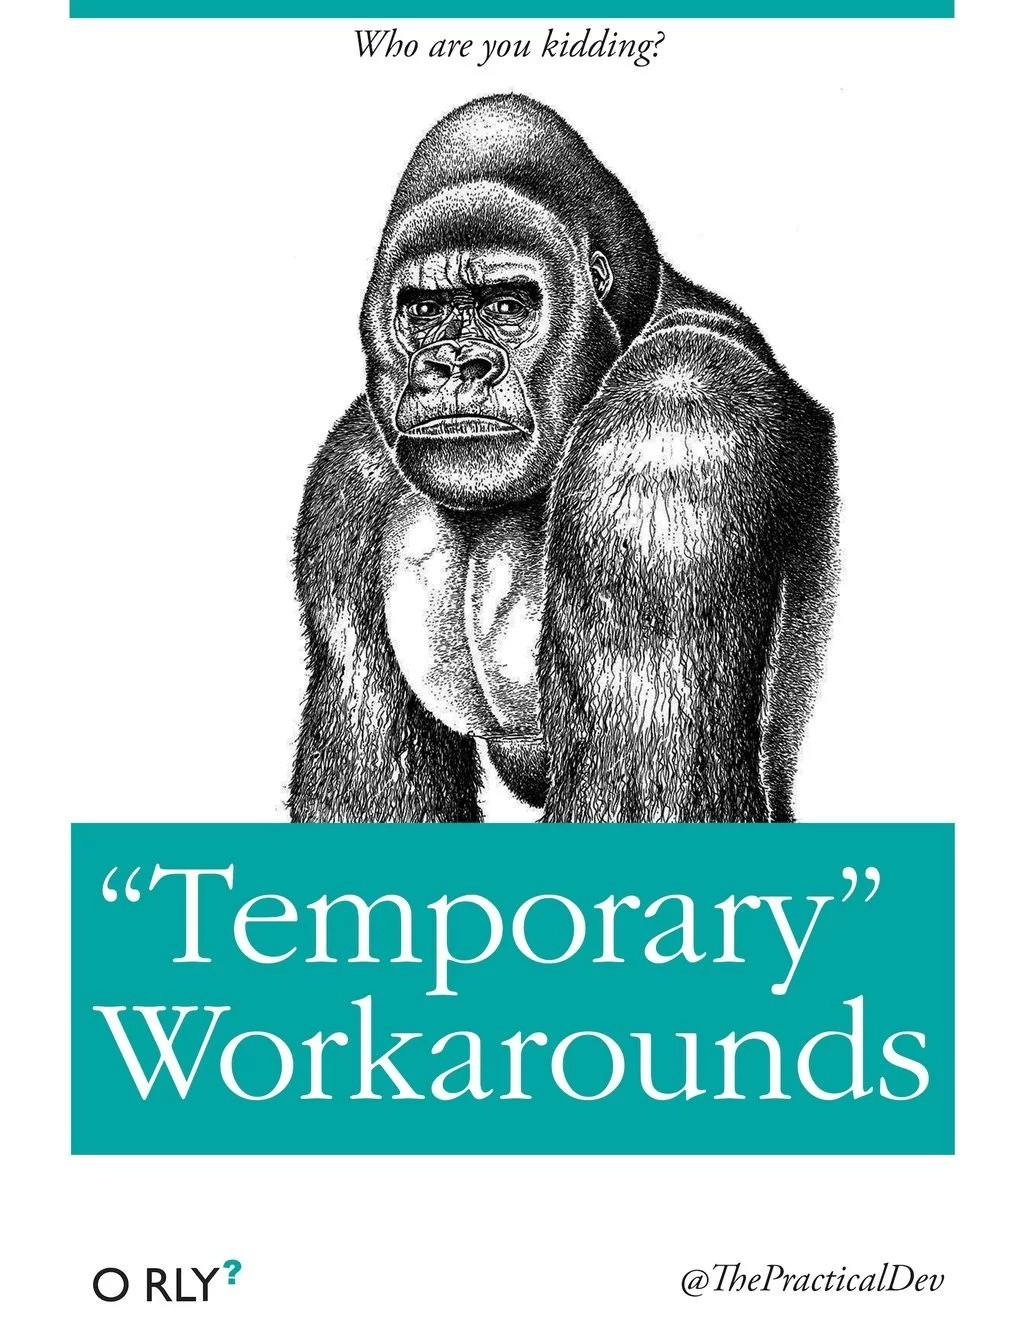 Temporary Workarounds | Who are you kidding?